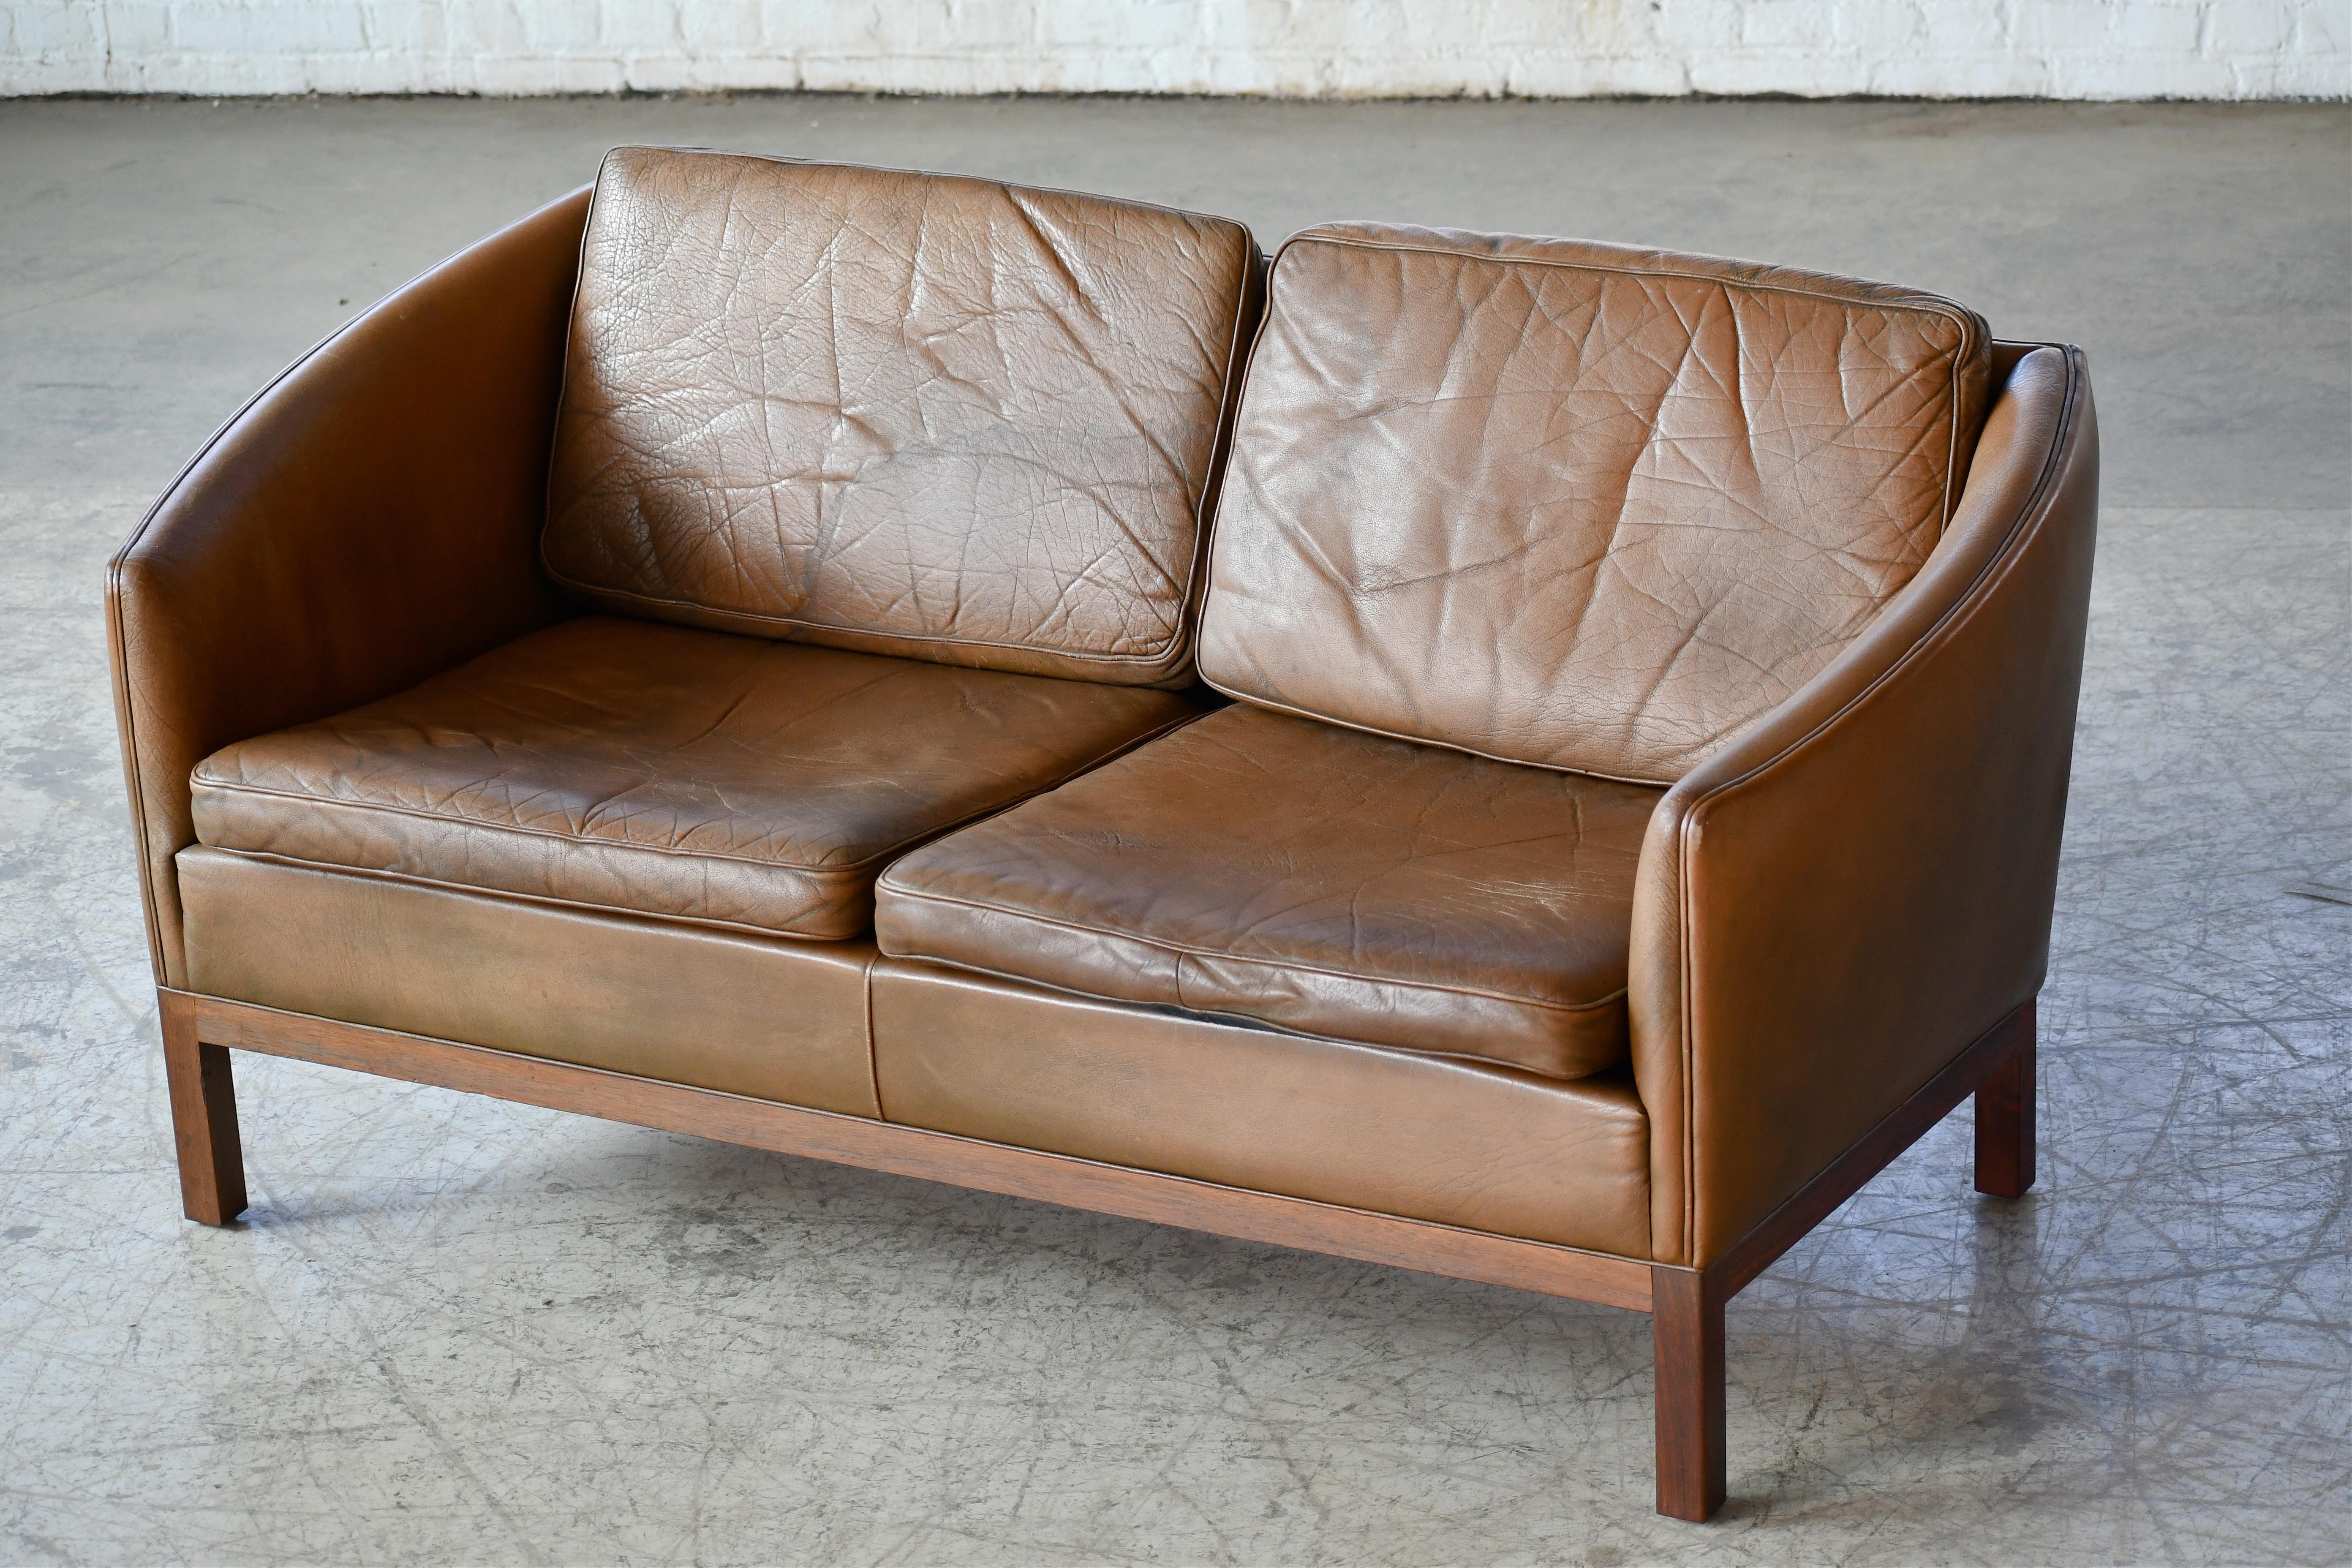 Mid-Century Modern Loveseat by Illum Wikkelso in Cognac Leather and Rosewood Denmark 1960's For Sale